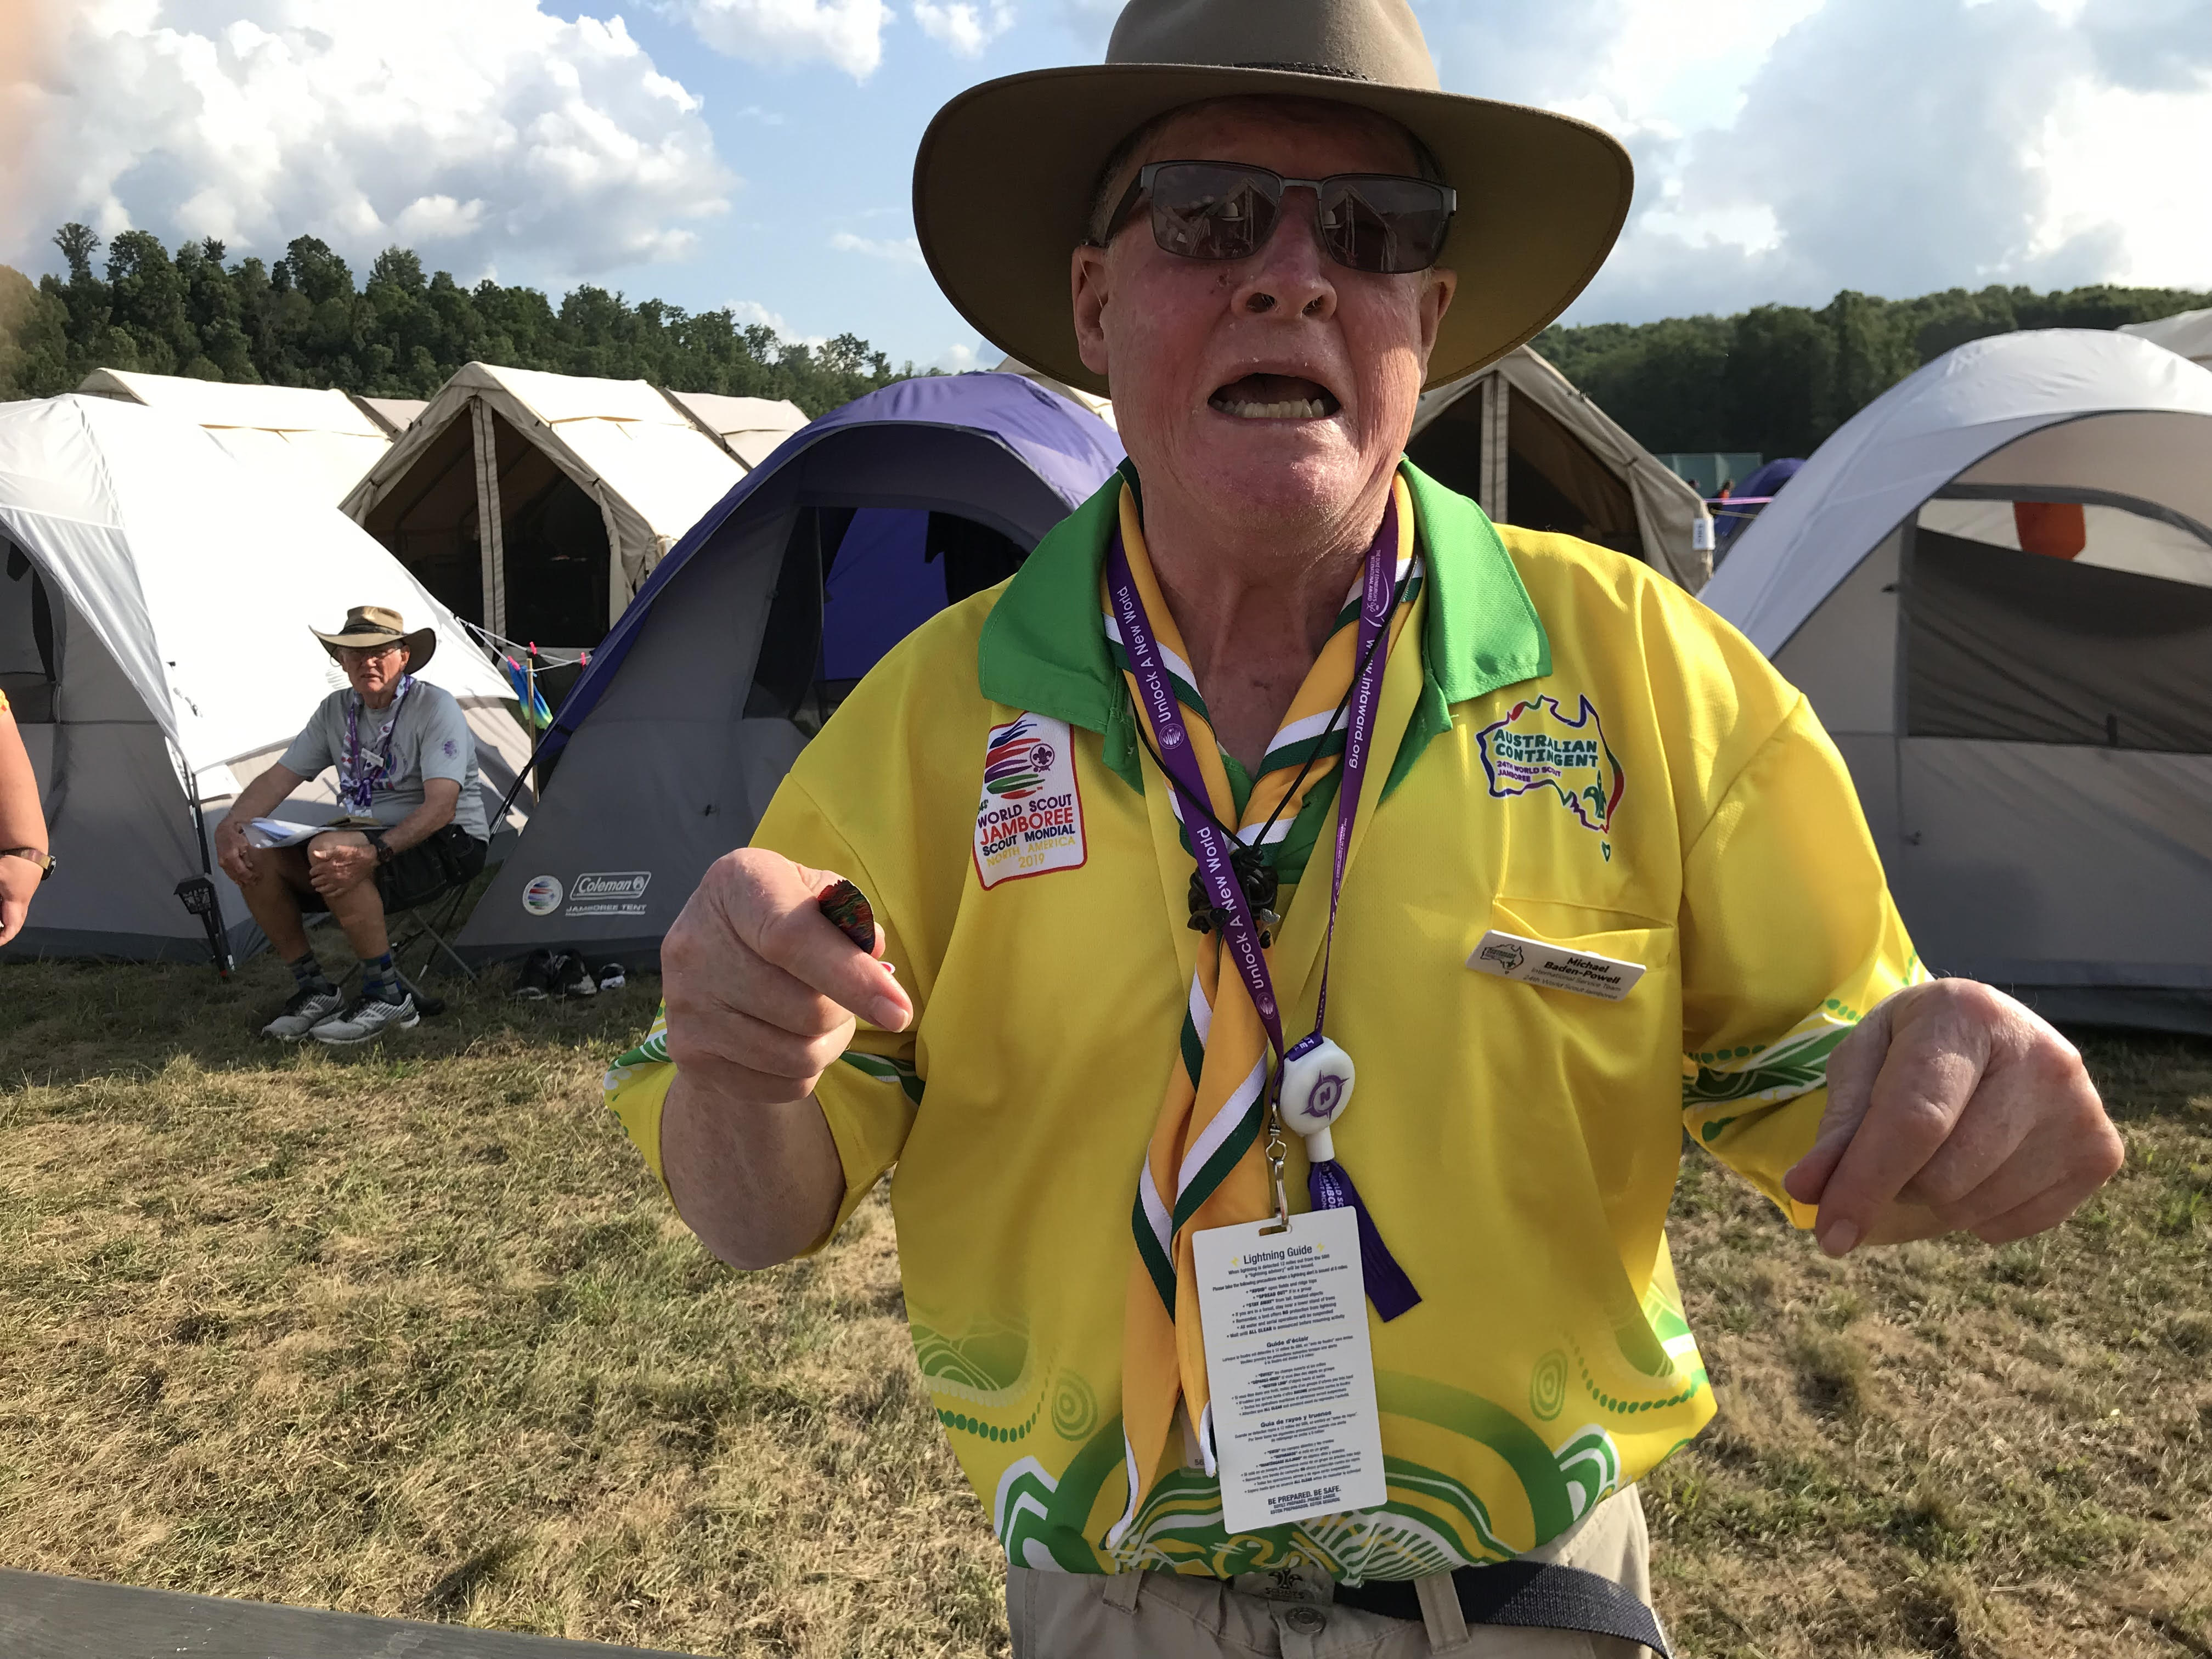 Grandson continues the legacy of Scouting founder